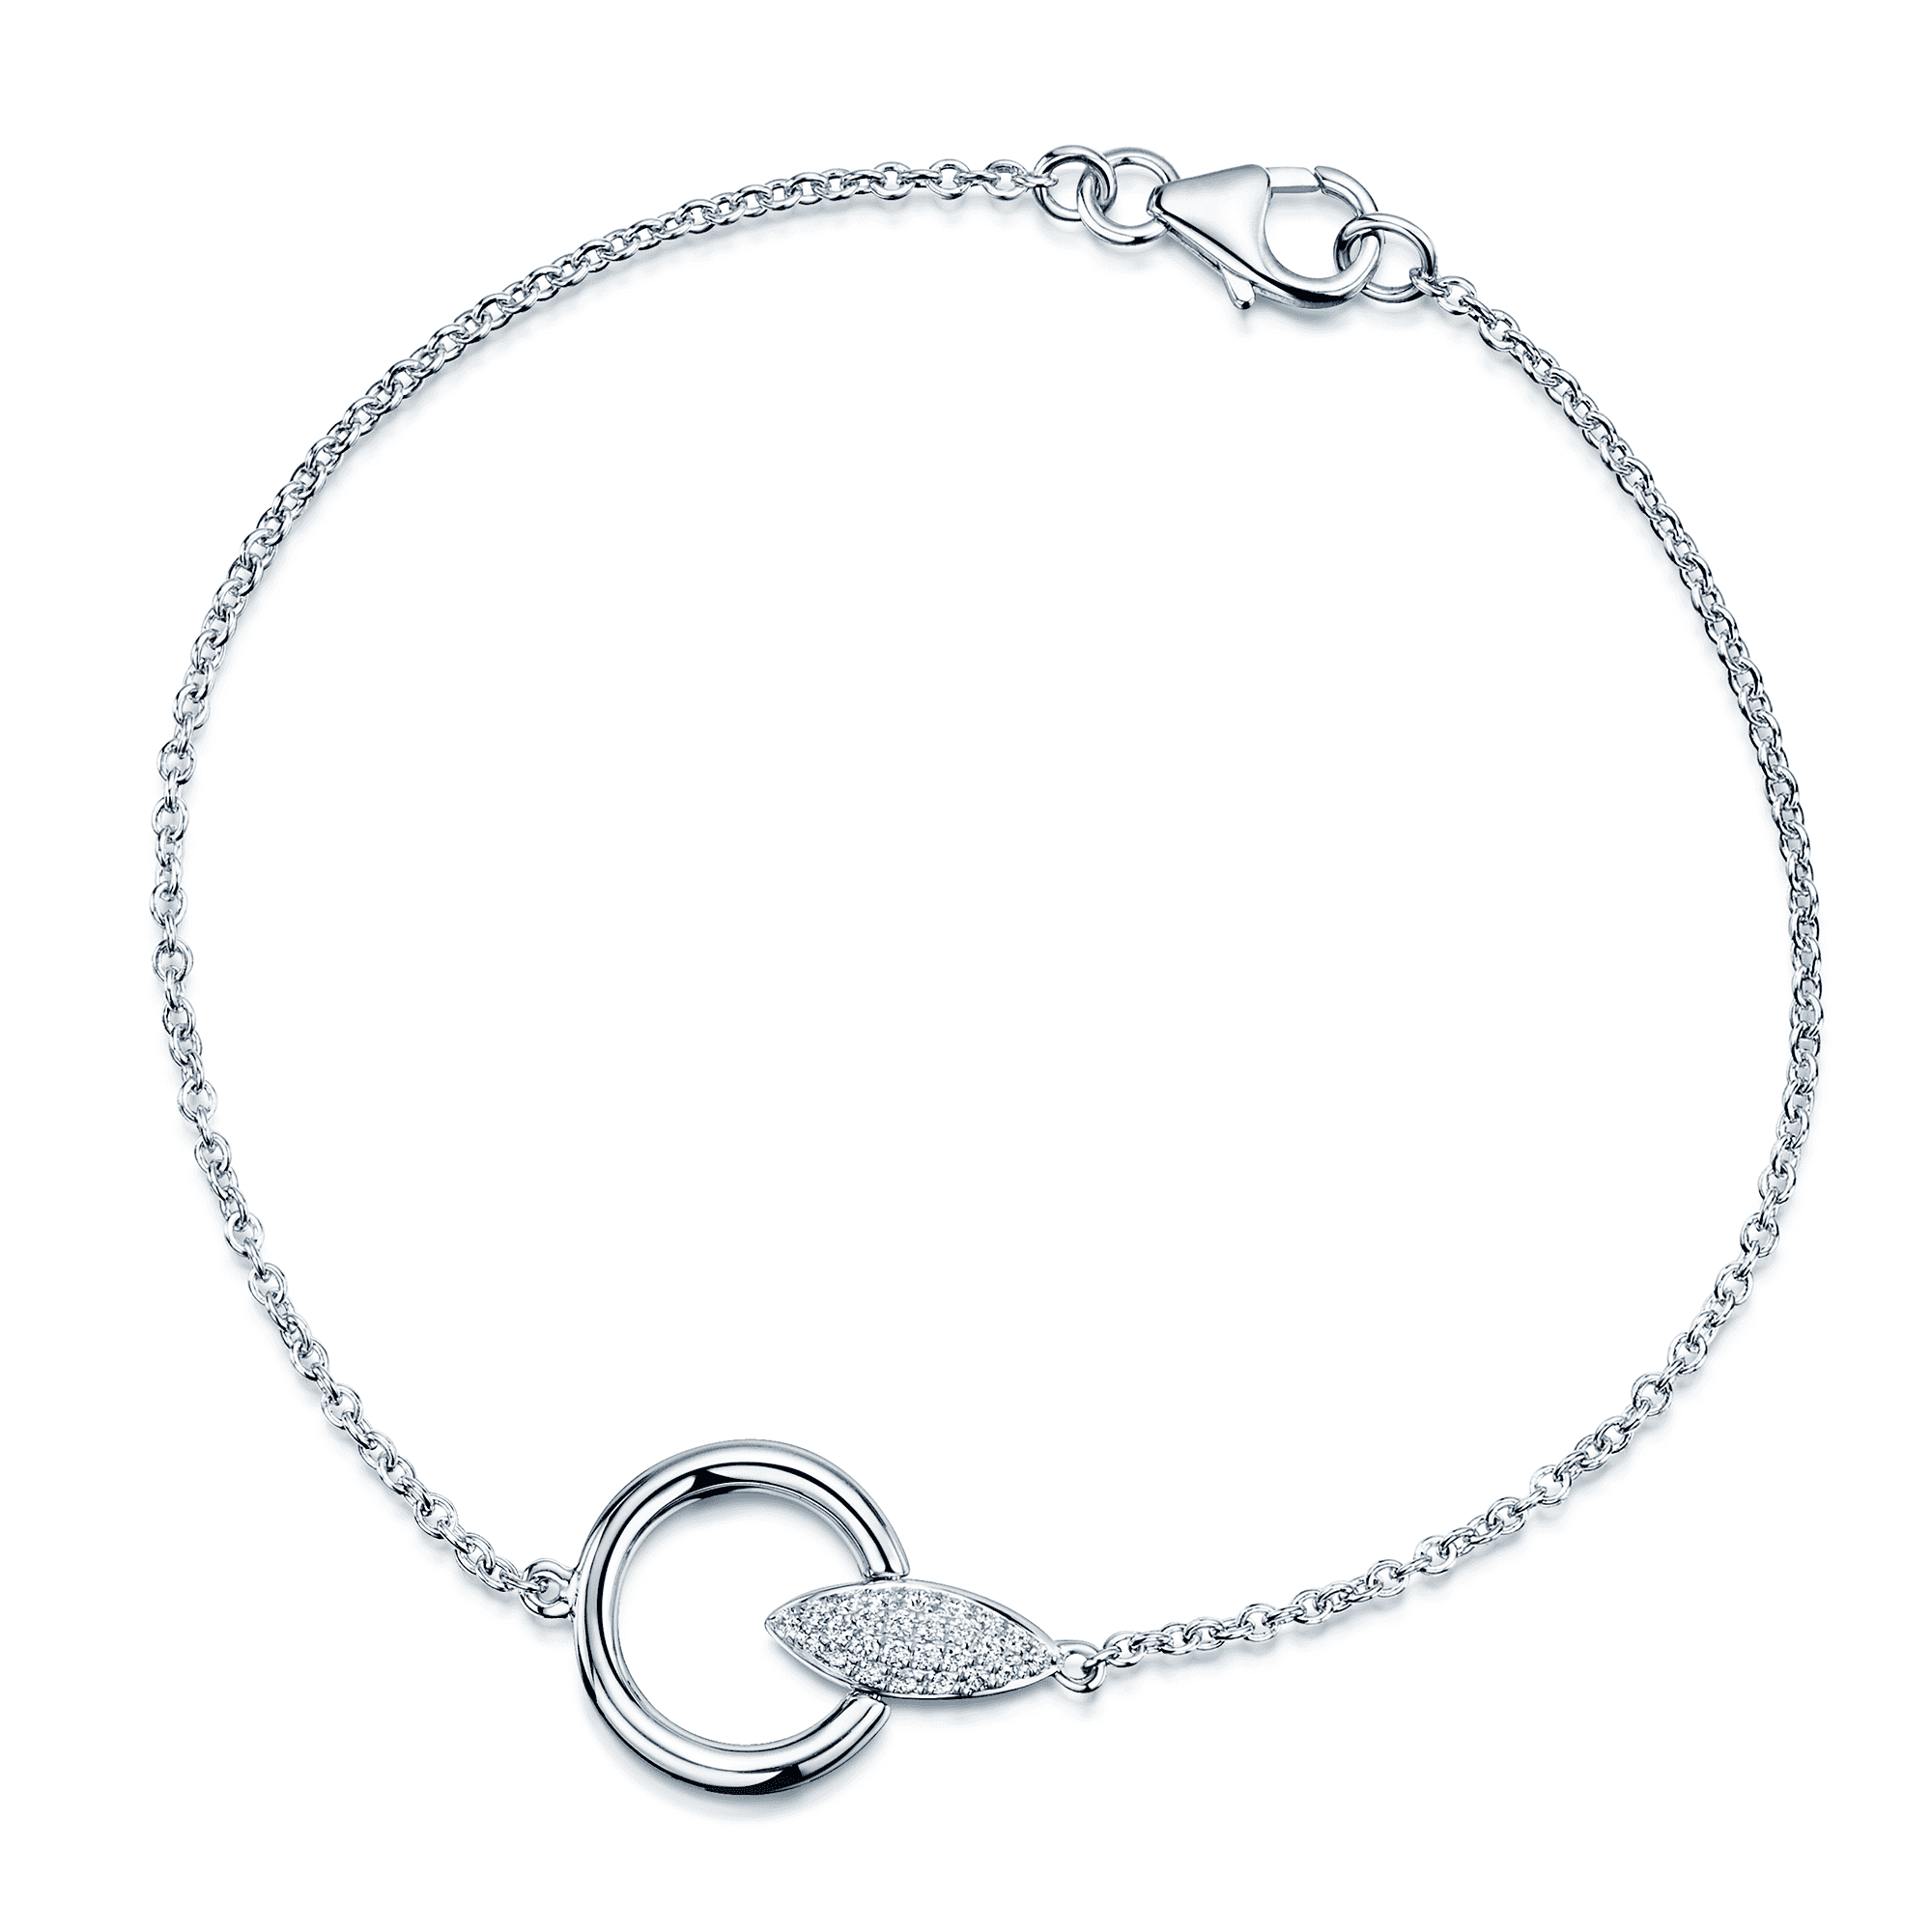 The Origin Collection 18ct White Gold Pave Diamond Seed Drop Circle Bracelet